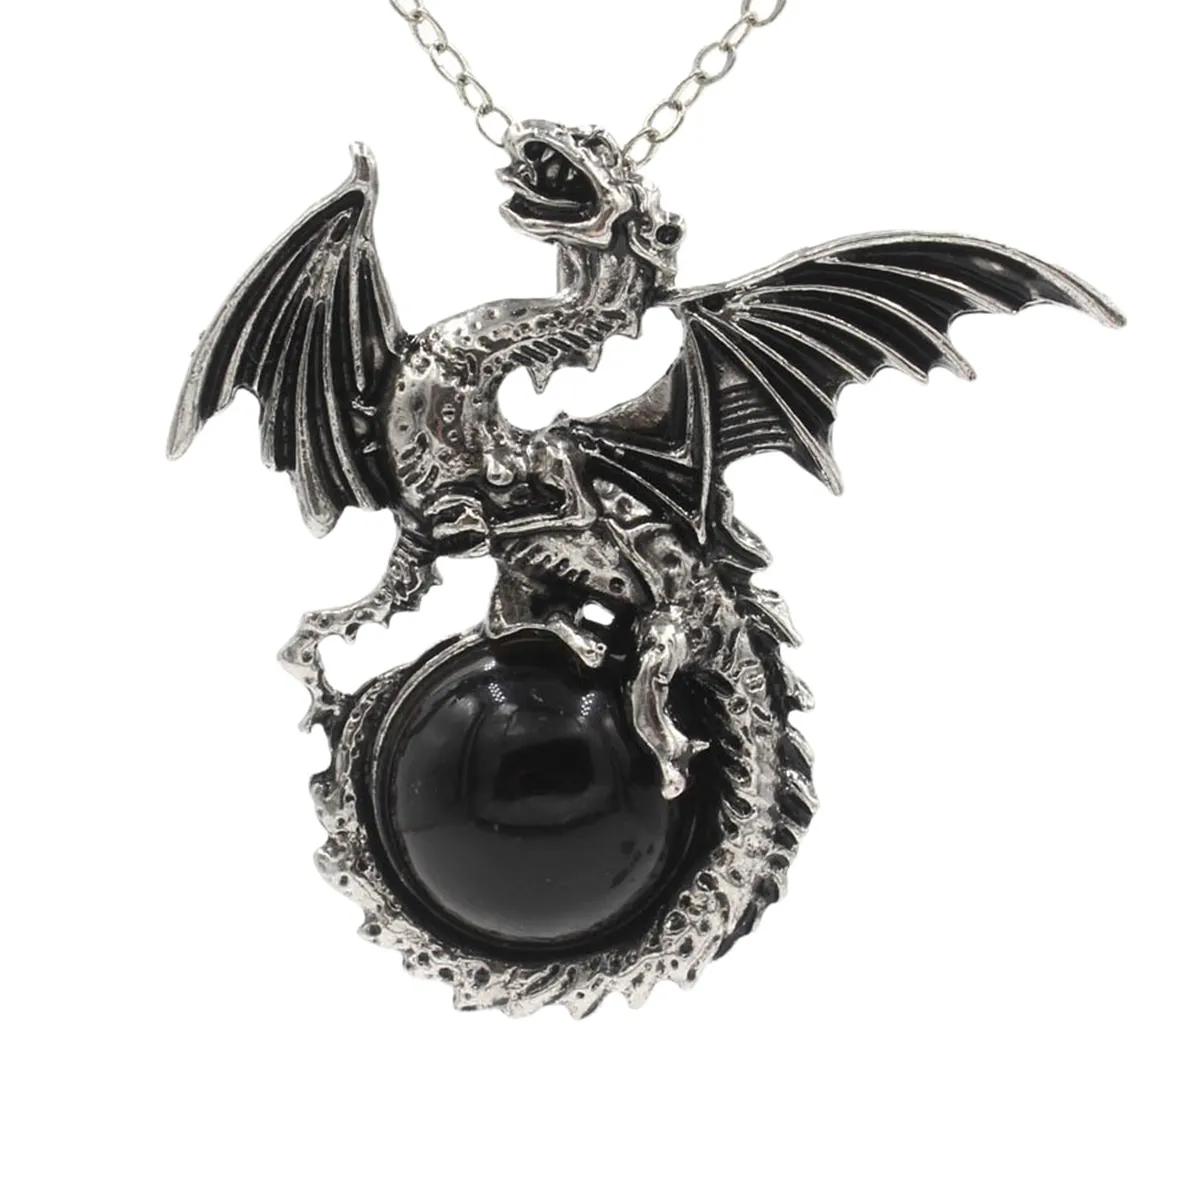 Vdasin Men Stainless Steel Pendant Necklace Hip Hop Punk Flame Dragon  Pendant Chain Party Jewelry Charm Friendship Gift Retro Silver Cuban link  chains | Amazon.com